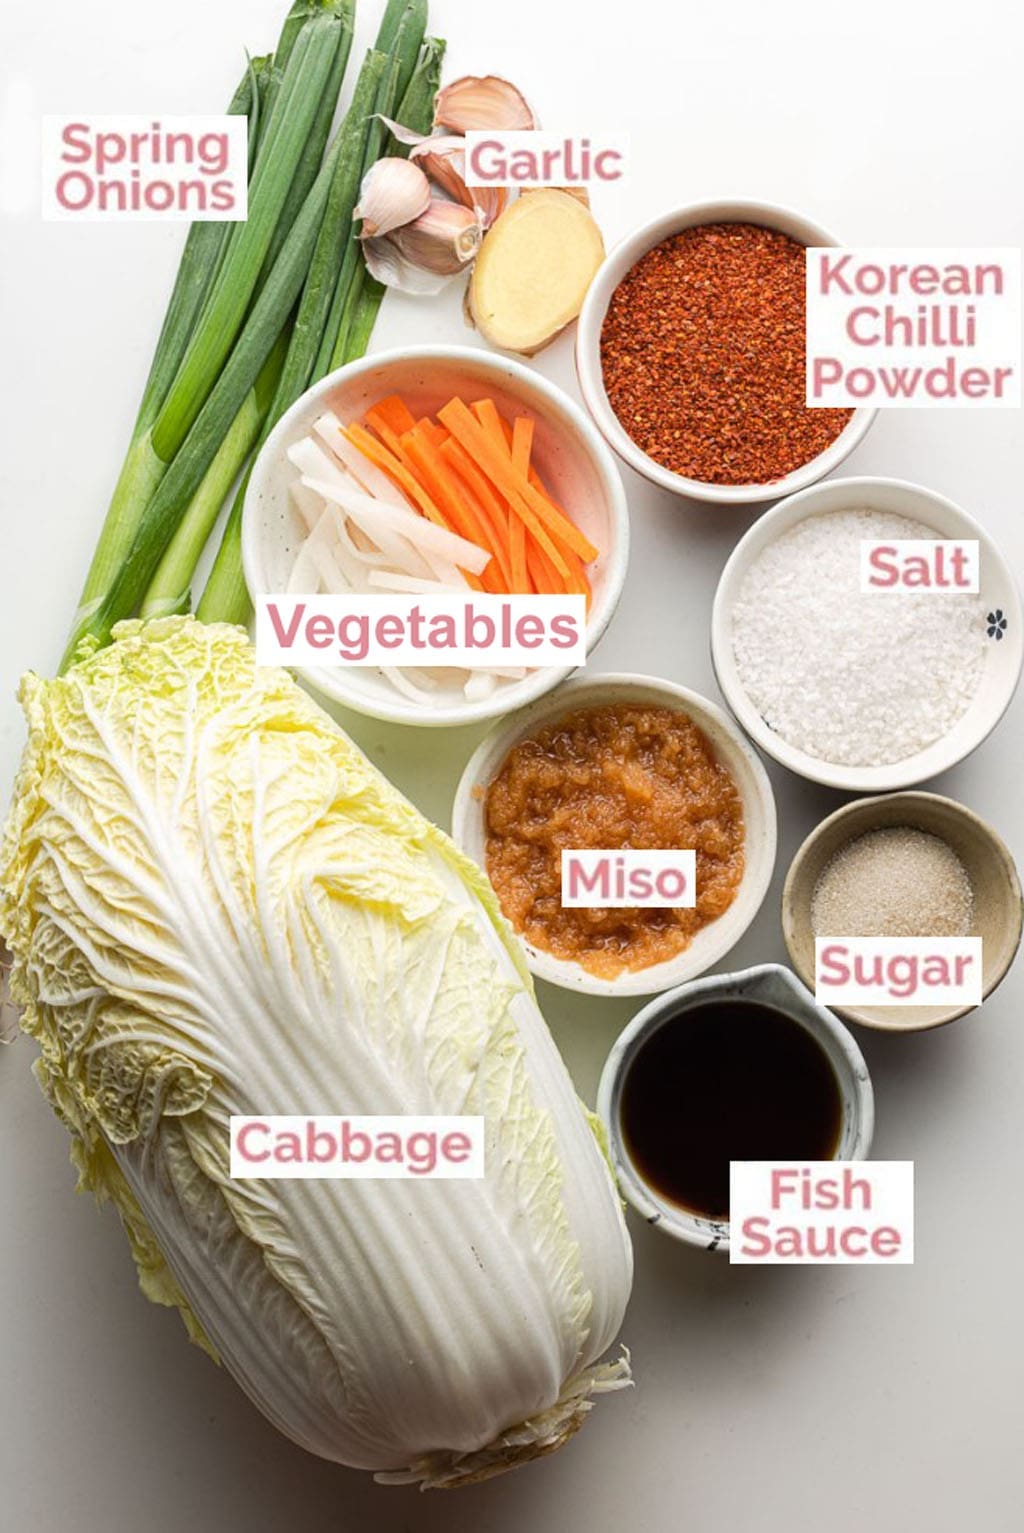 The Power of Kimchi: A Nutritional Superfood